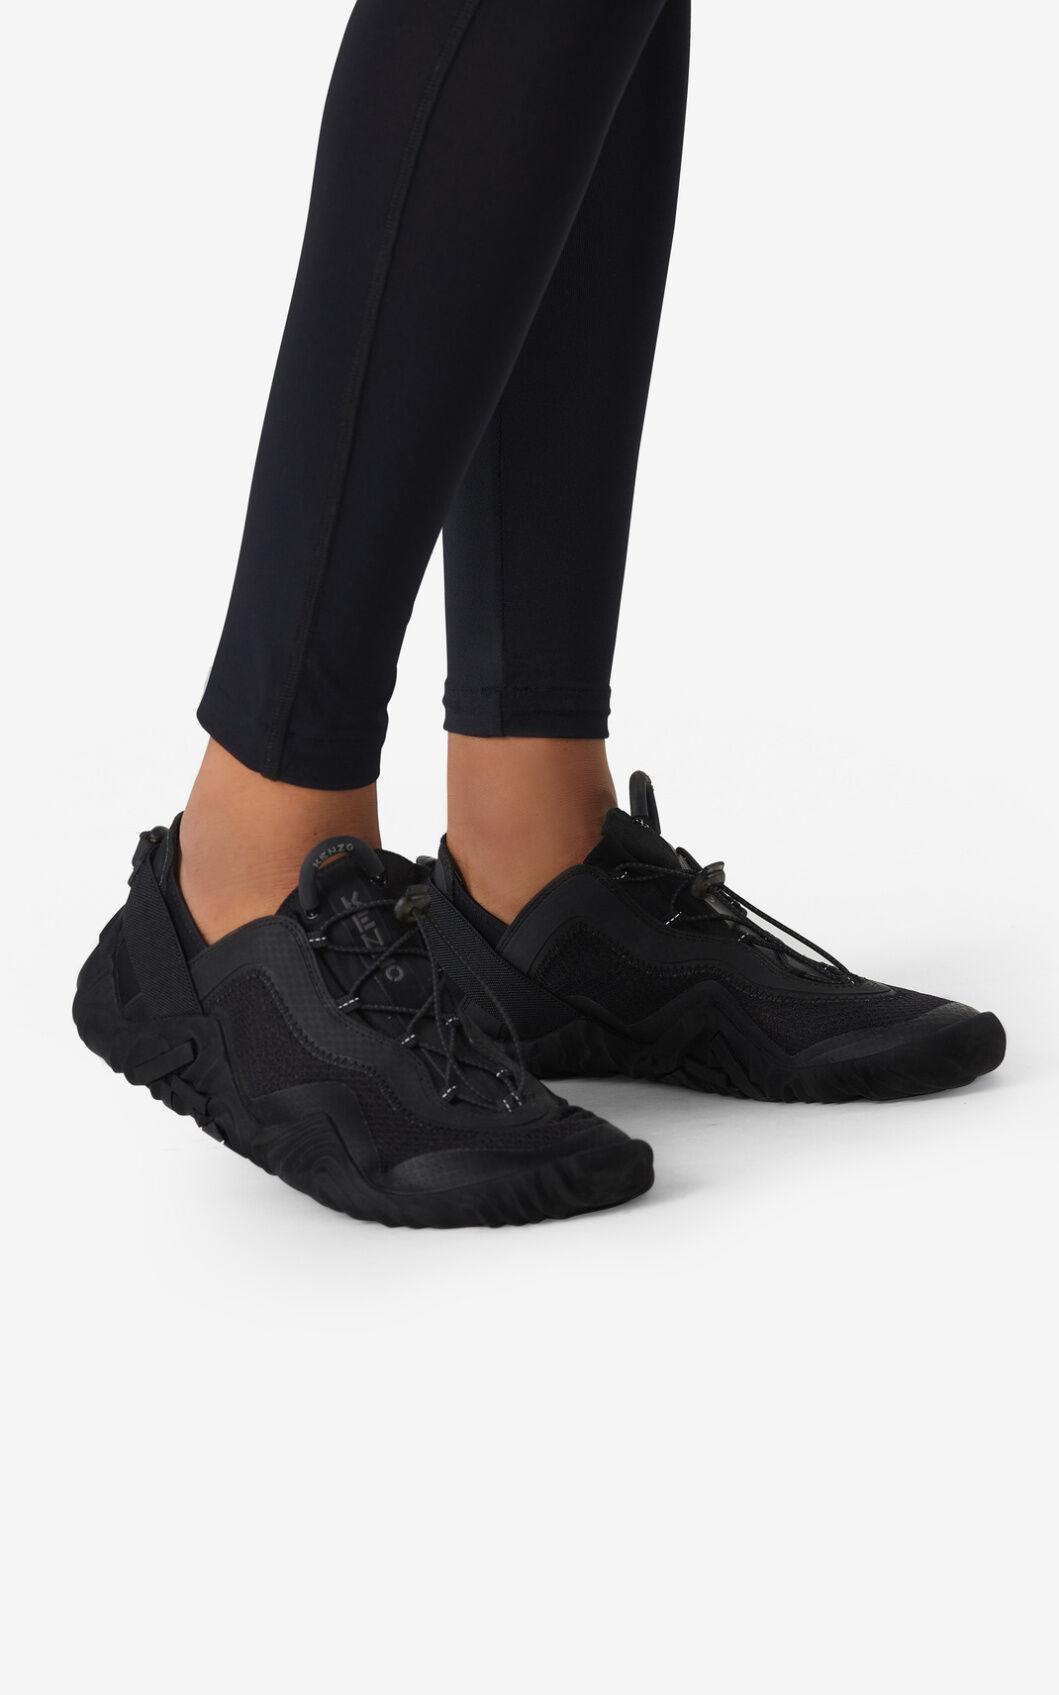 KENZO Lace Sport Wave Mesh Trainers in Black - Lyst